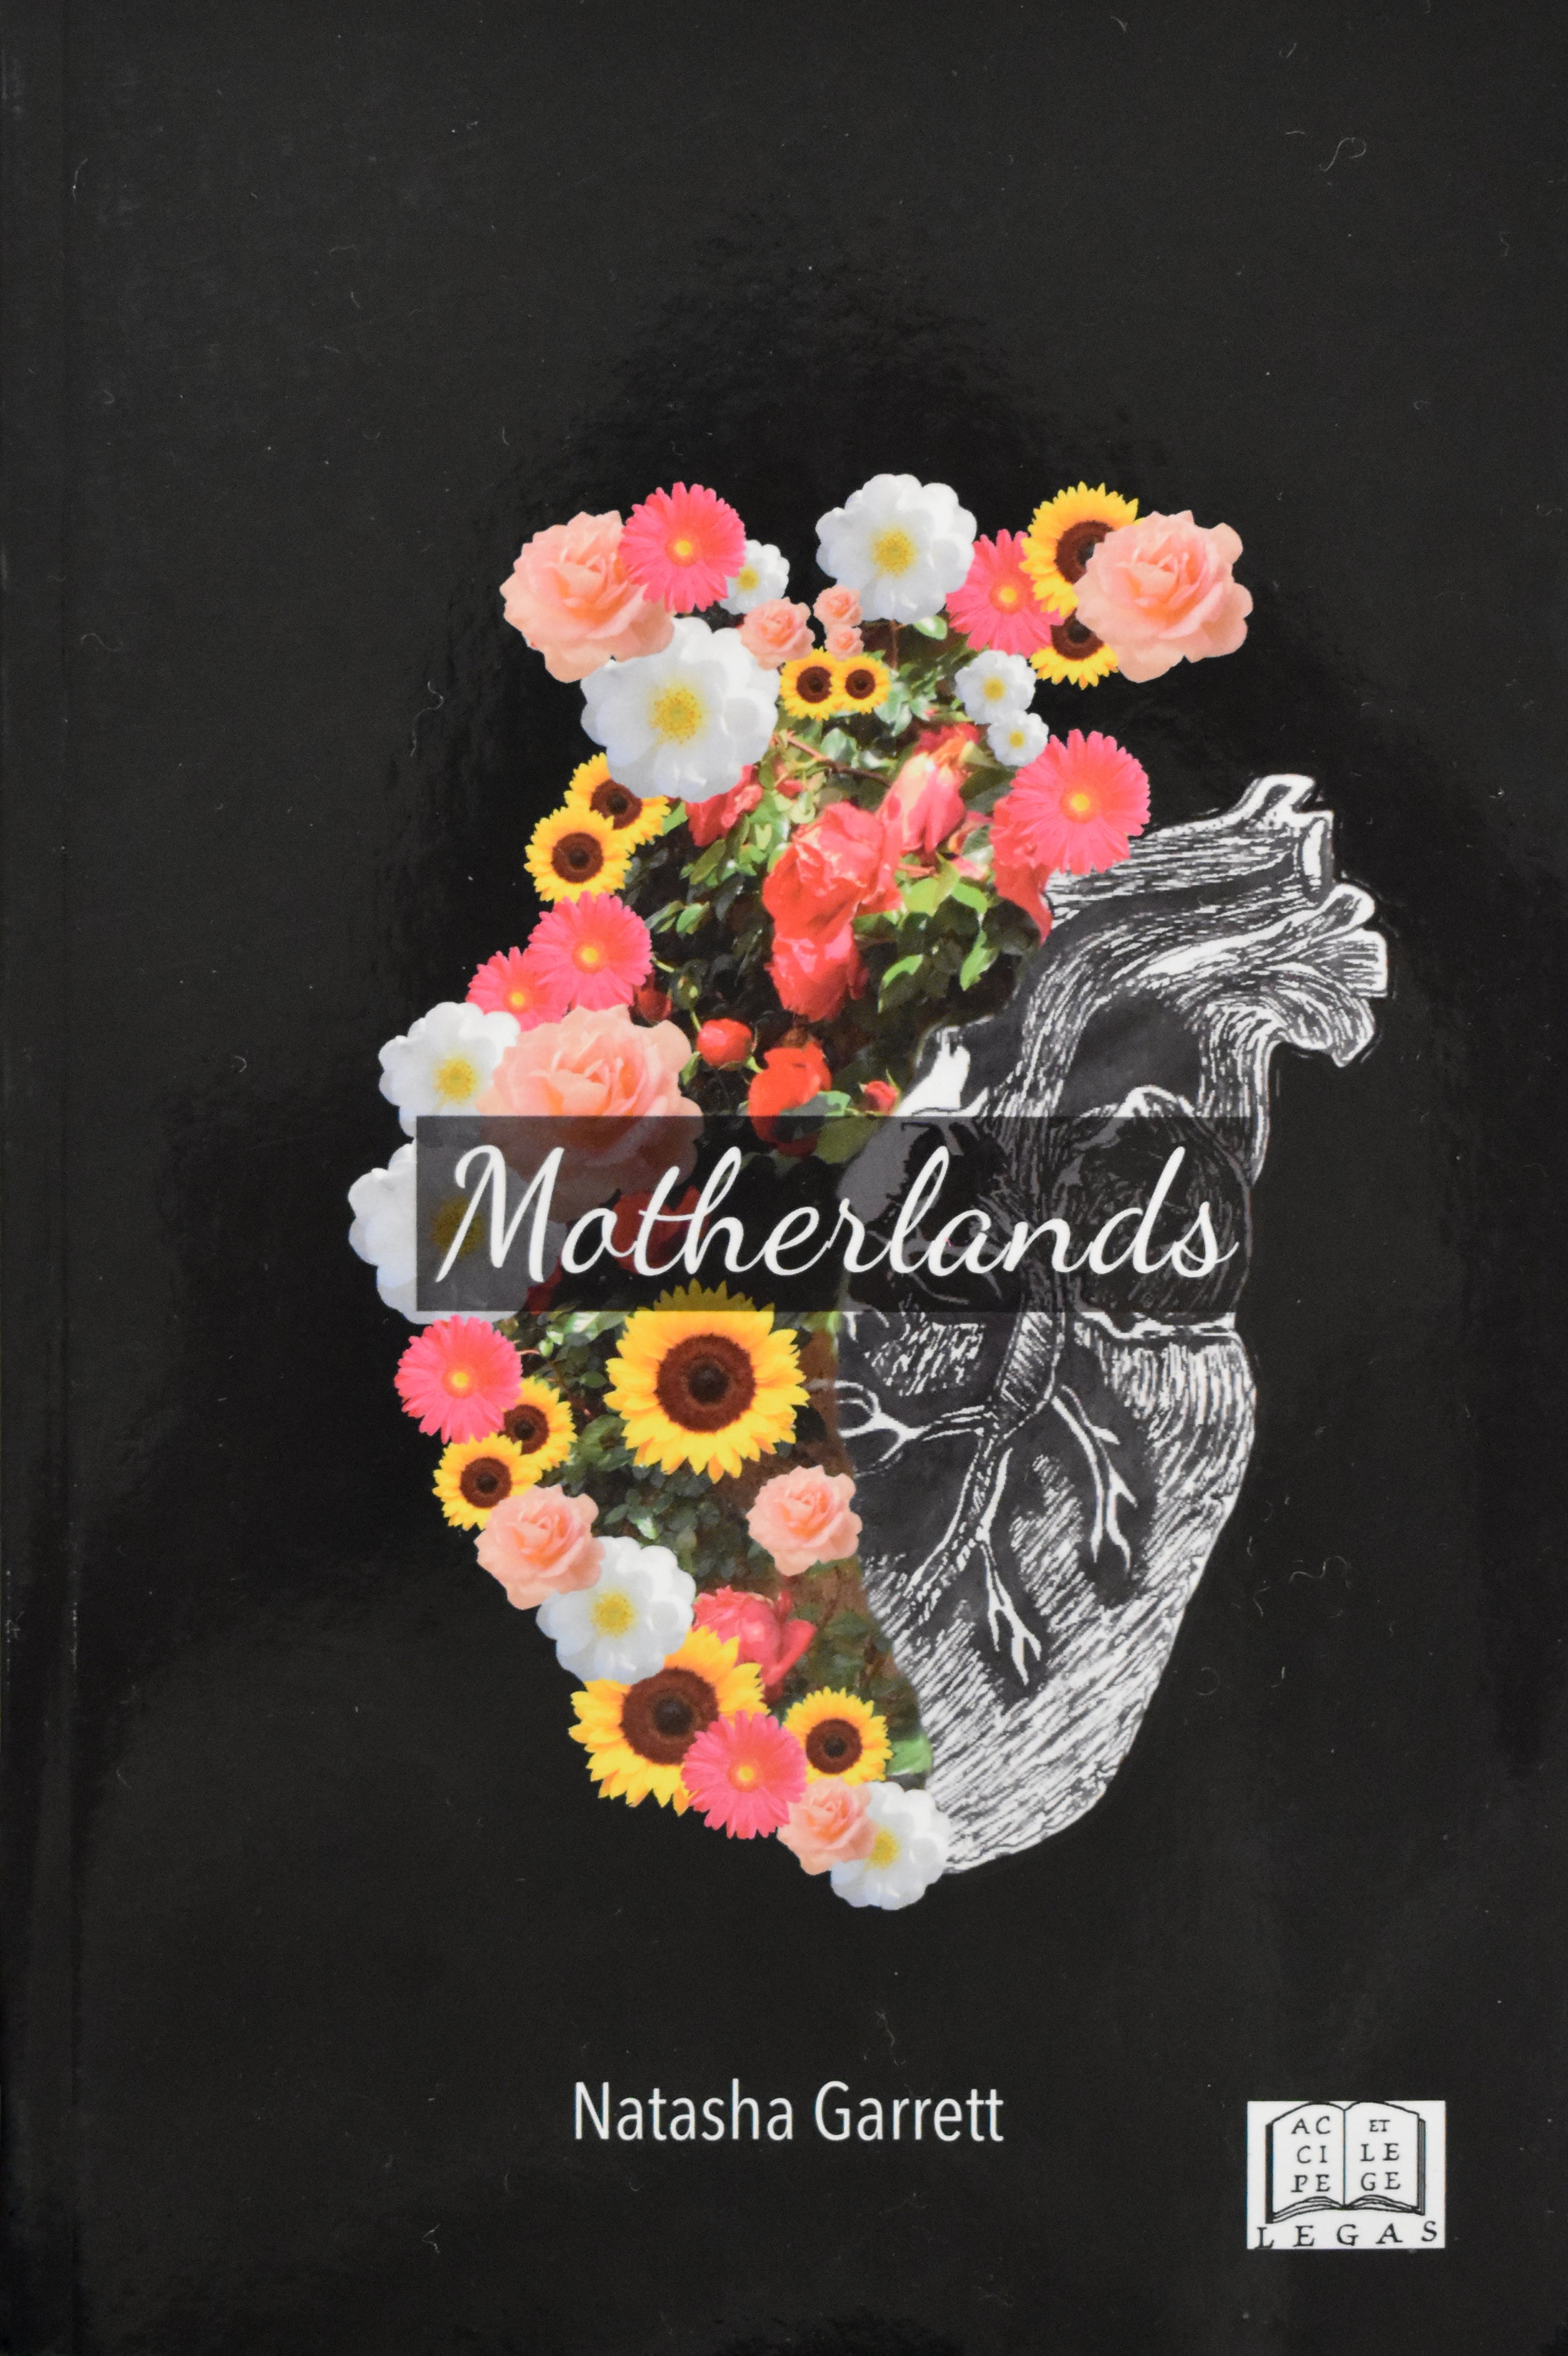 book cover of Motherlands, an anatomical heart with colorful flowers in it, over a black glossy background